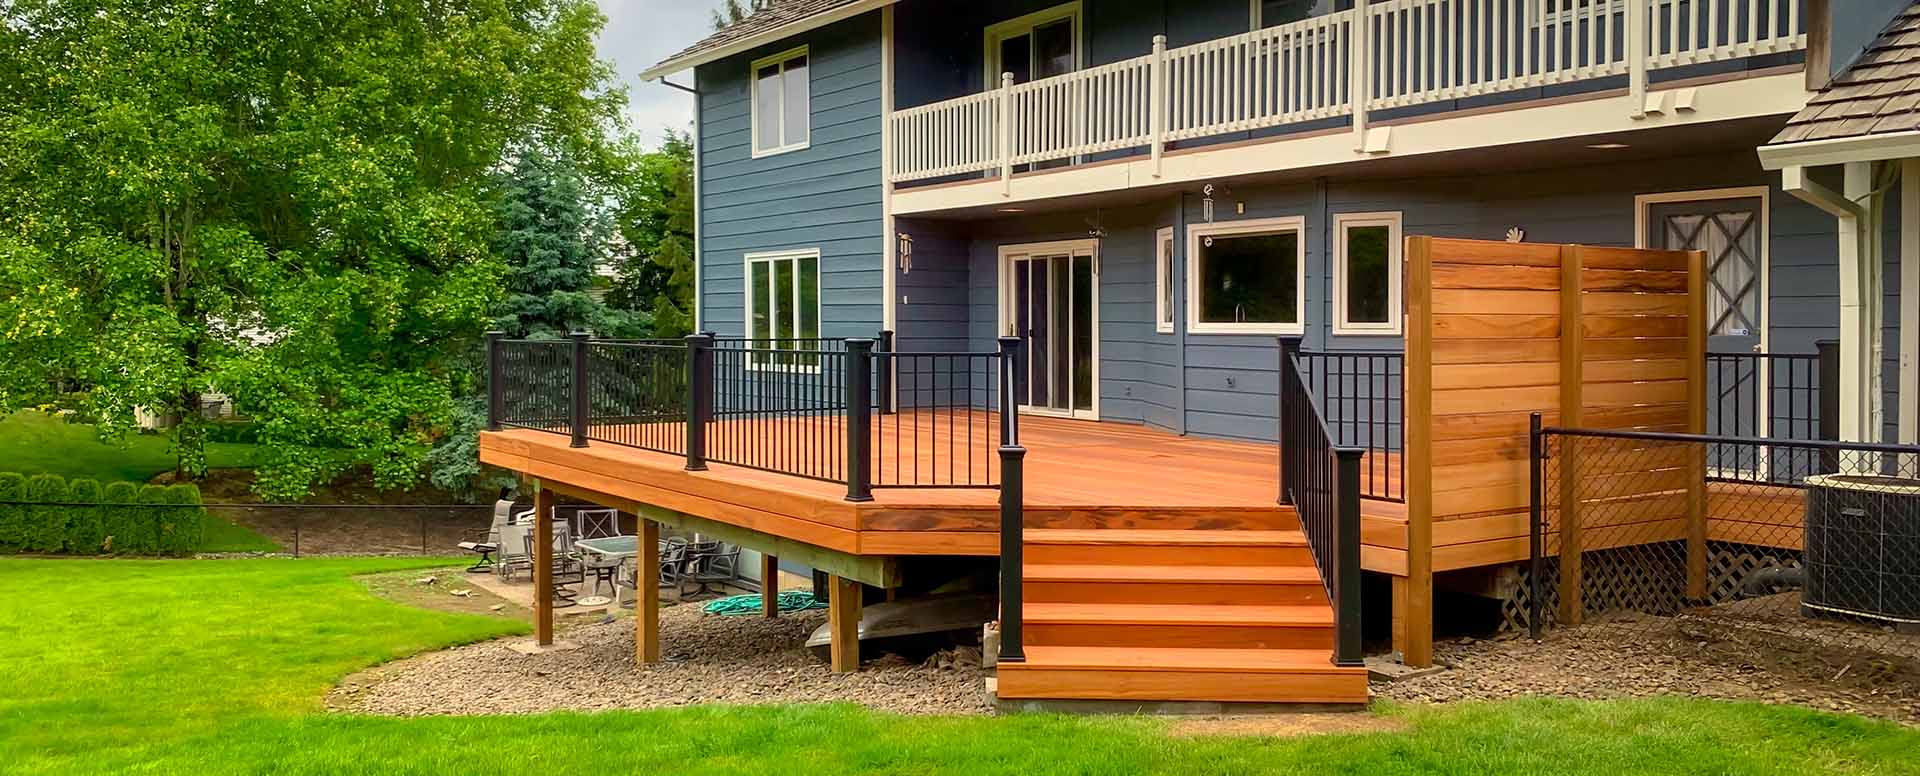 The backside of a blue house with a new deck on the first floor with black metal railing.